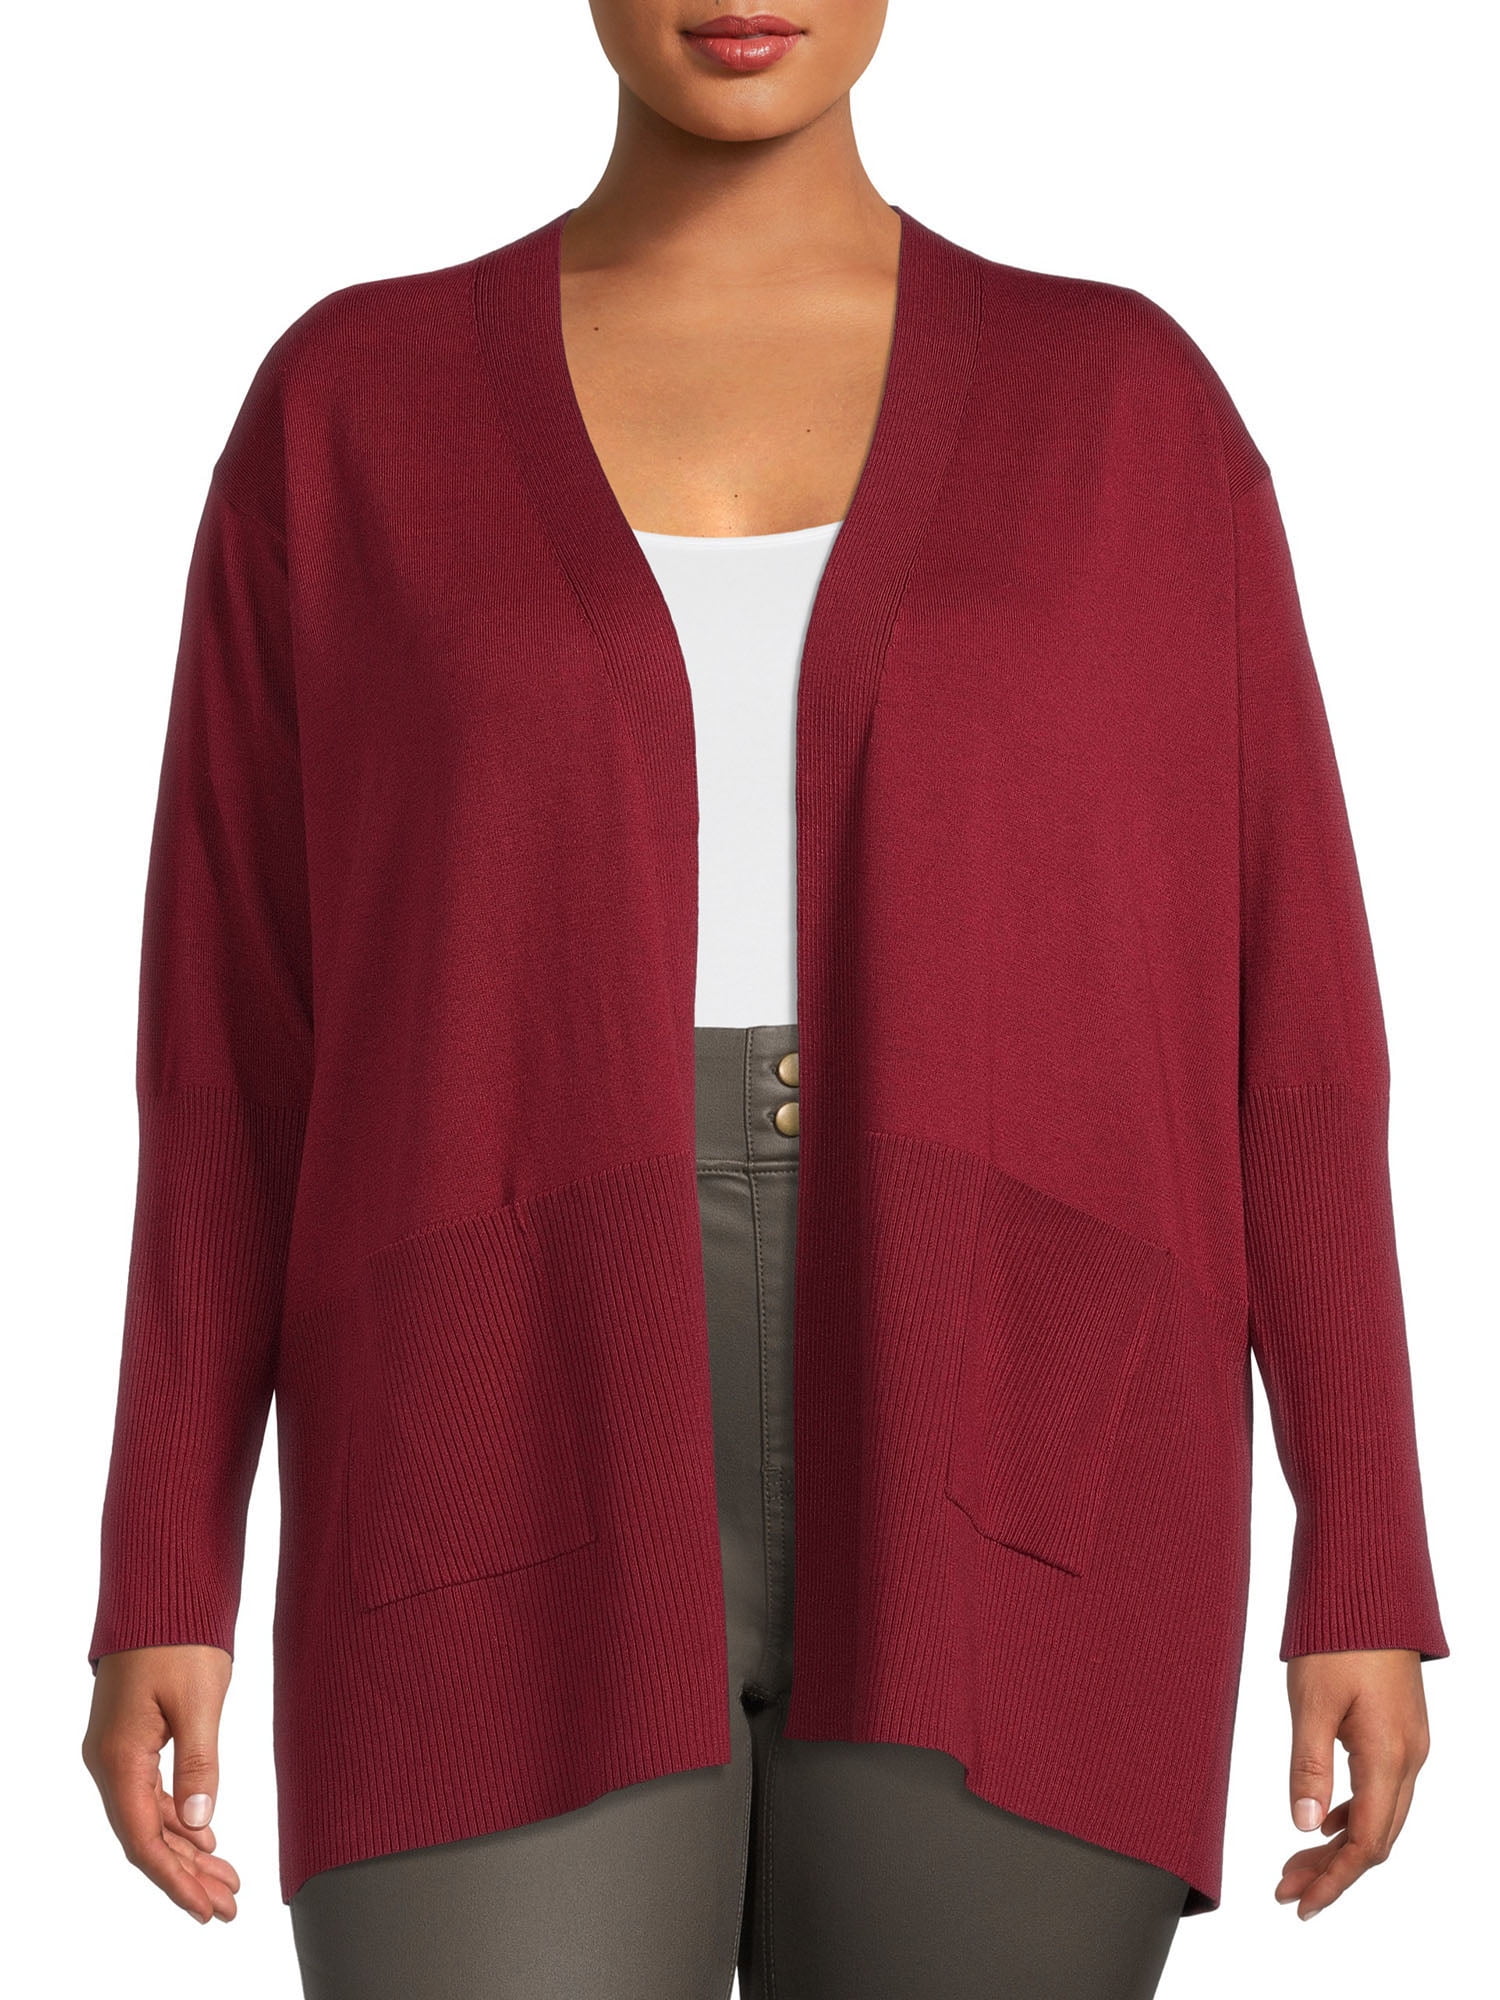 Capes For Women Dressy Long Cardigan Sweaters For Women Maroon Cardigan  Women Summer Cardigans For Women Lightweight Plus Size dollar out of  fifteen